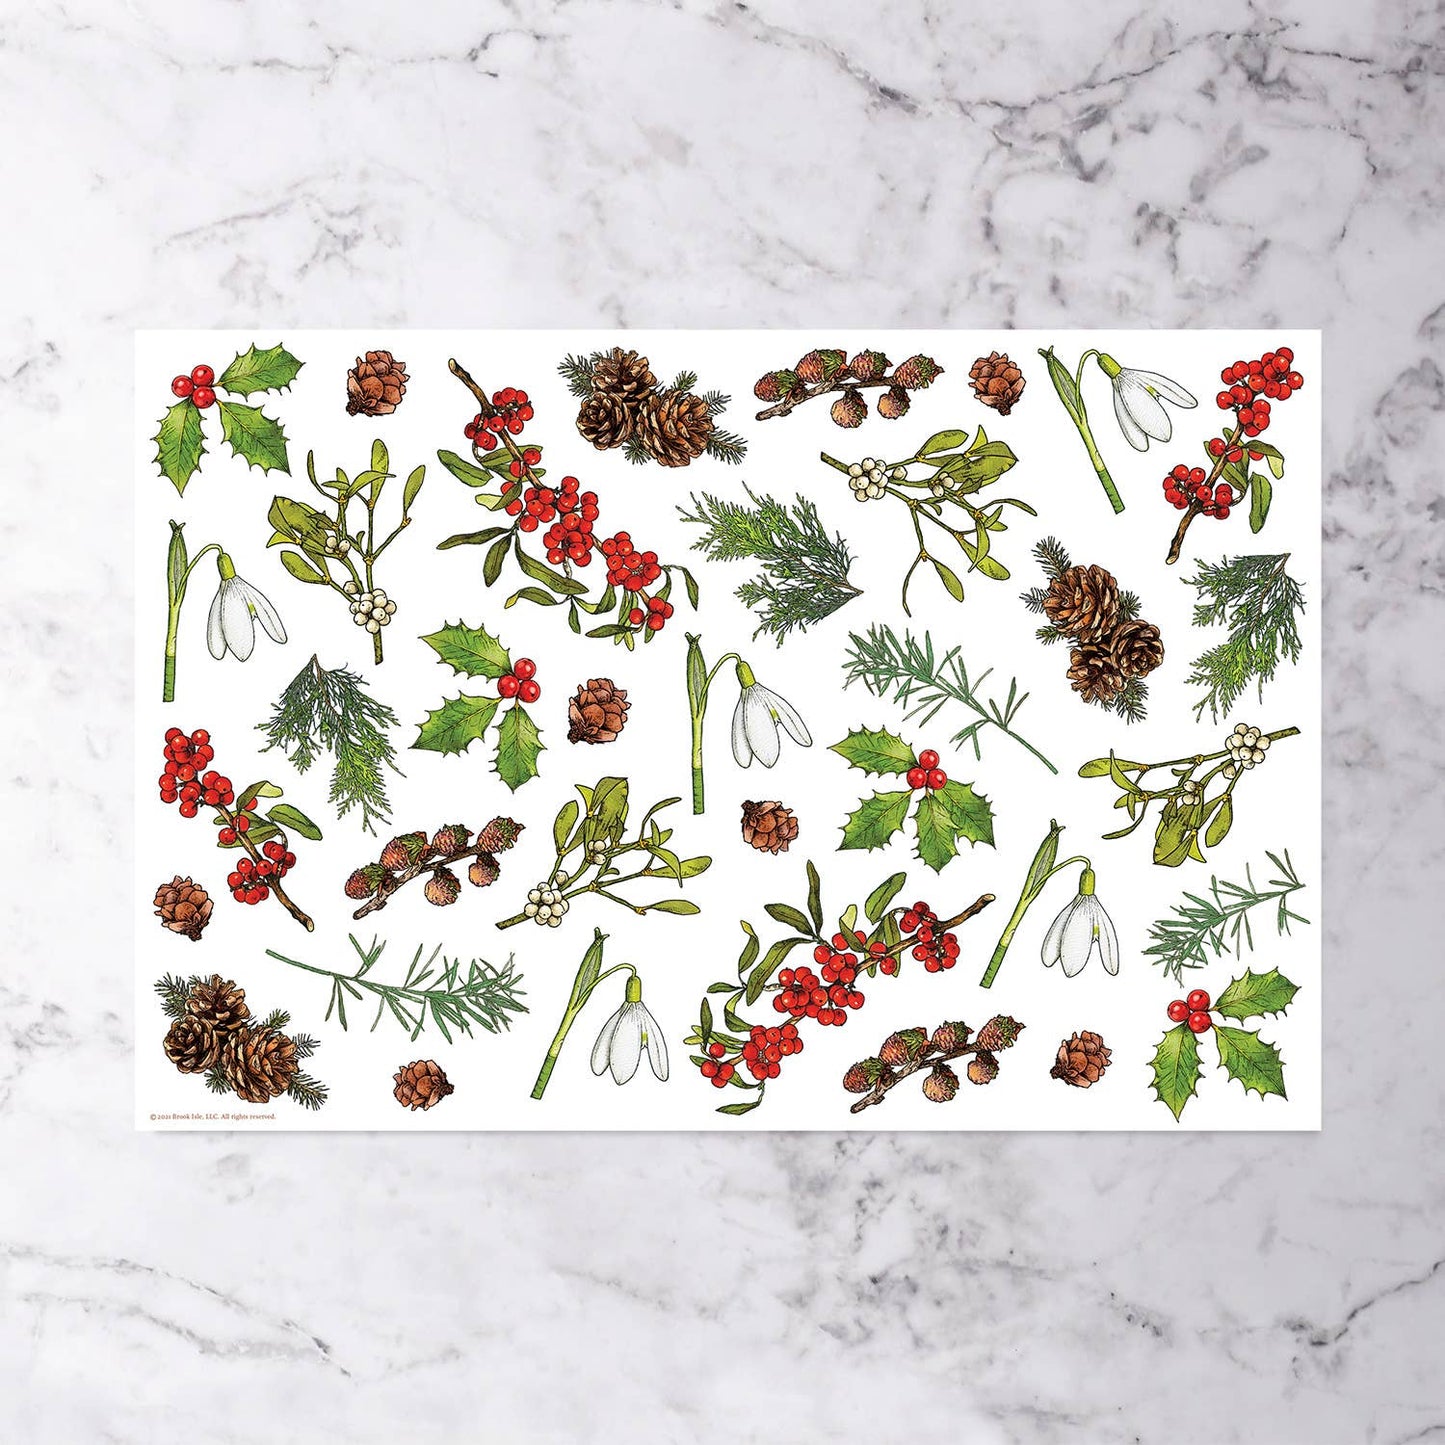 Paper Placemats (Set of 12) - Fenwick & OliverPaper Placemats (Set of 12)PaperBrook IsleFenwick & OliverMAT-Fern-2